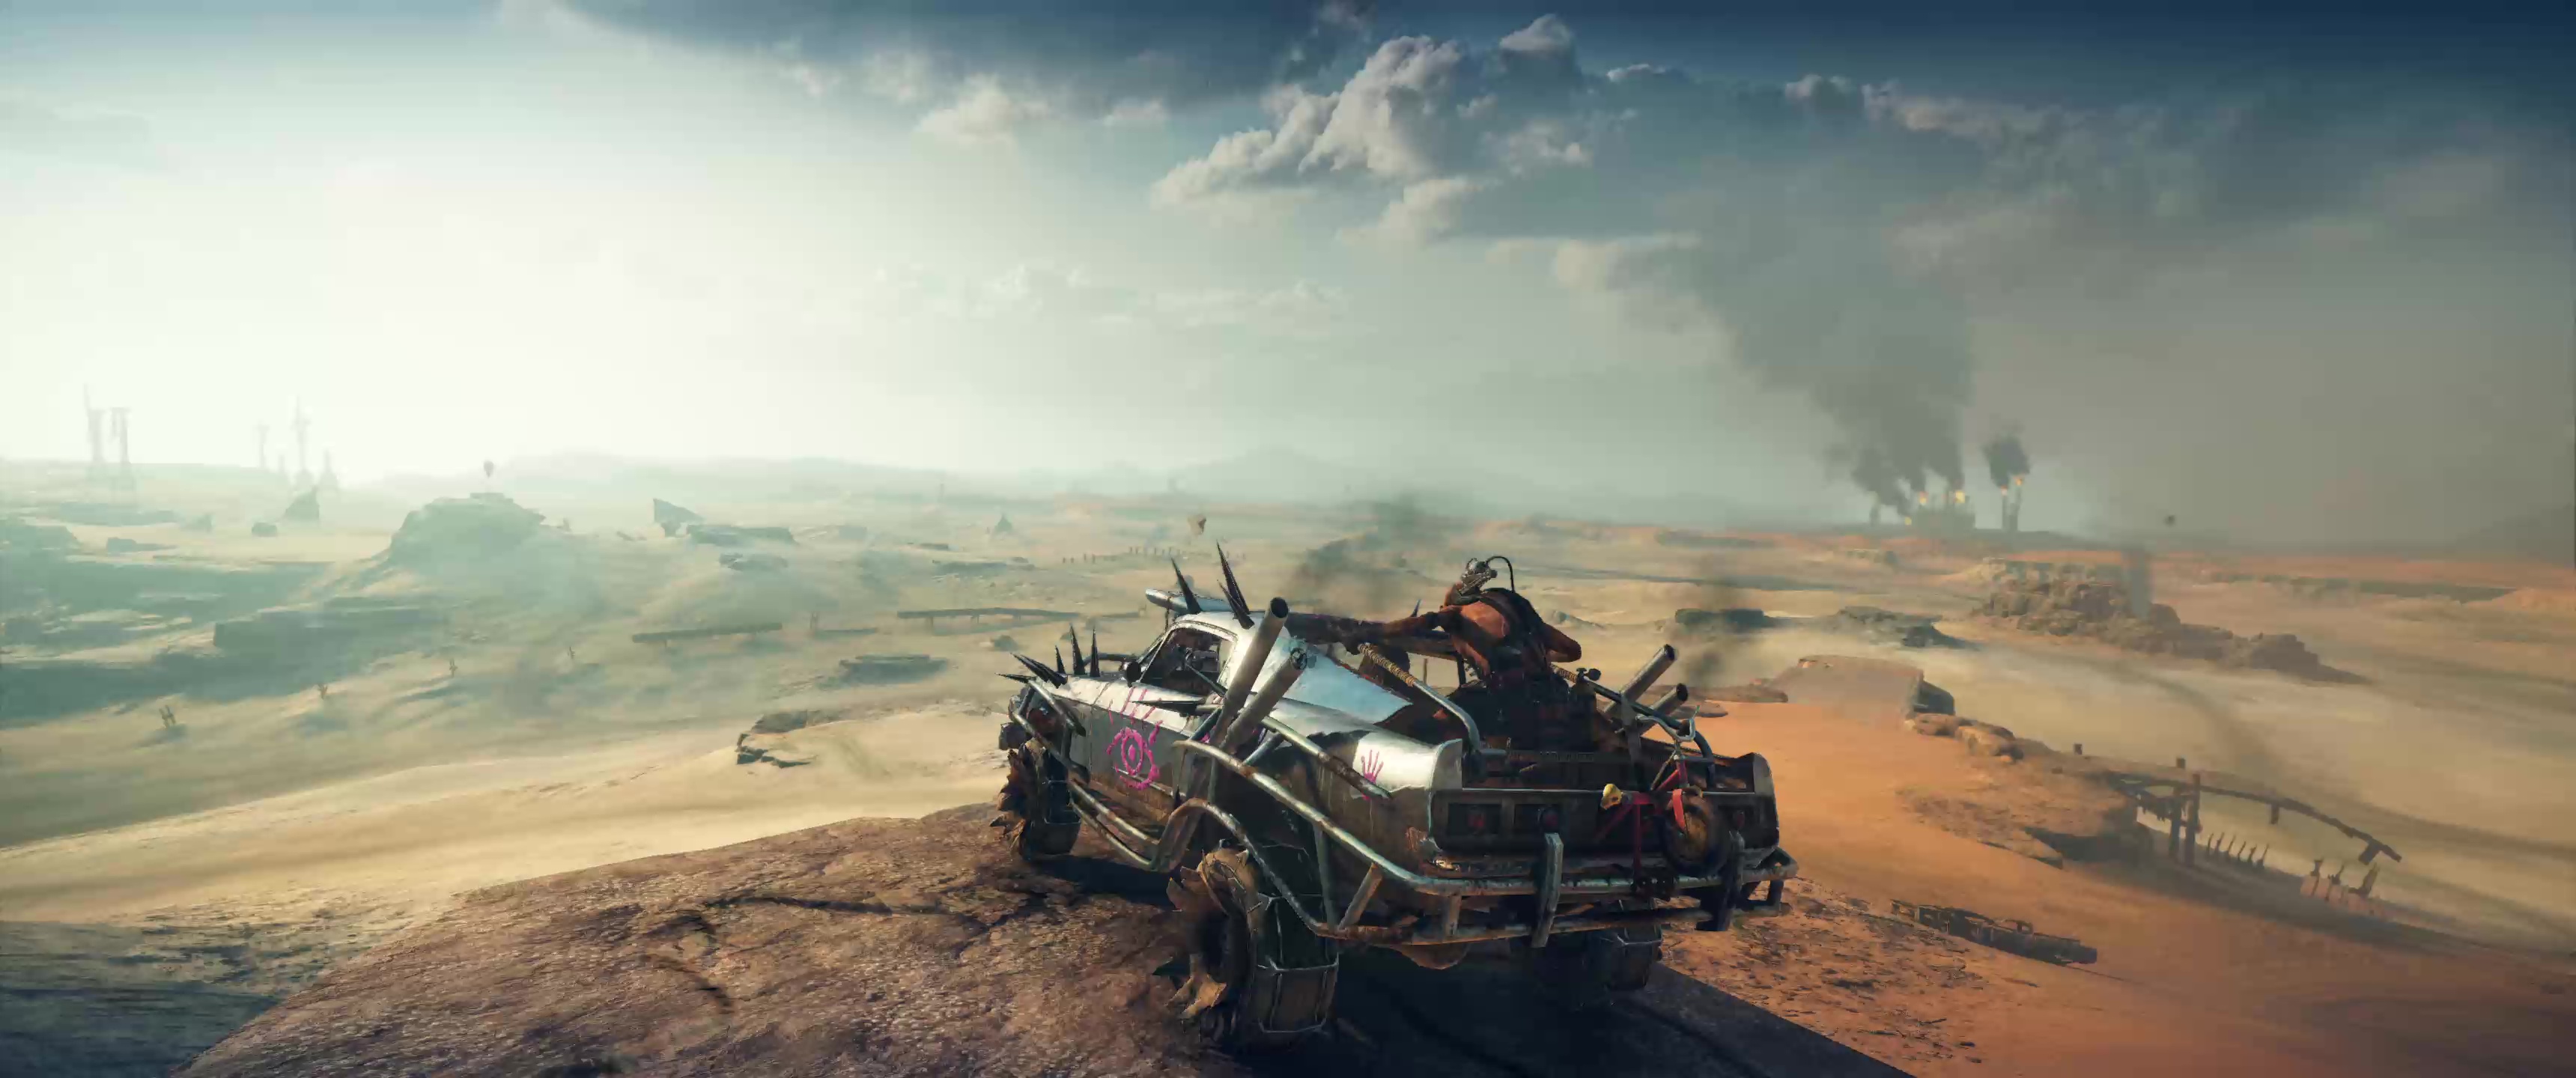 HD wallpaper Mad Max video games nature weapon one person sky  architecture  Wallpaper Flare